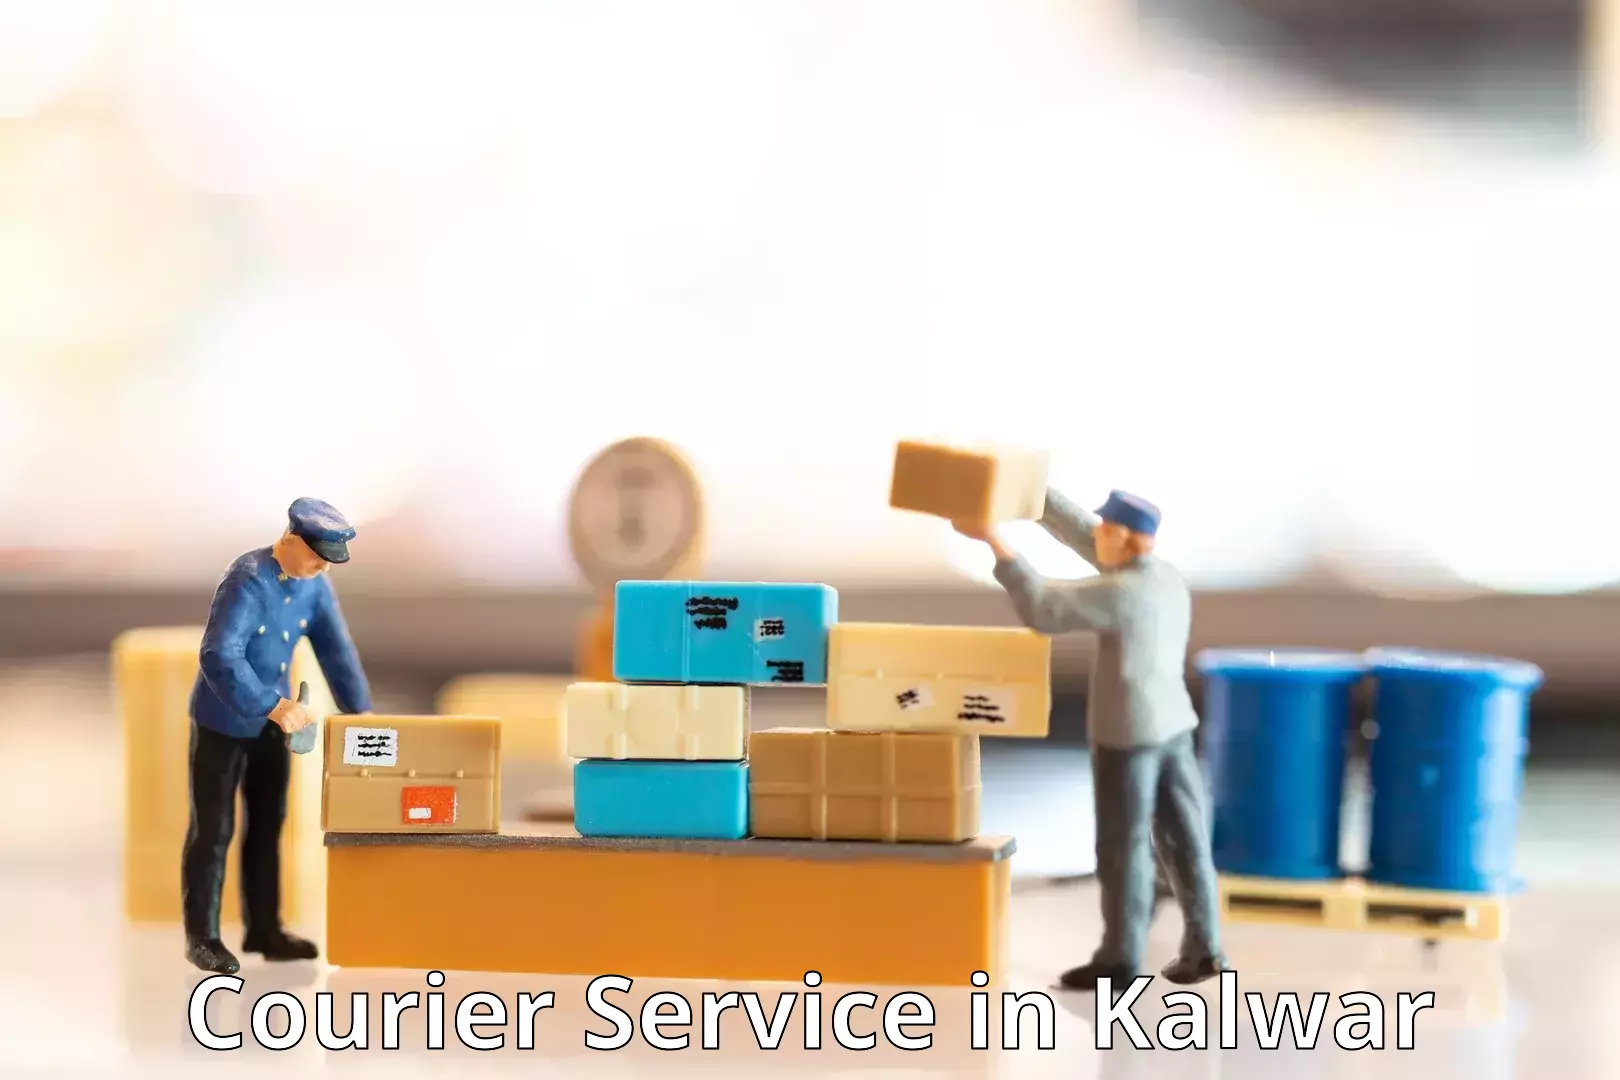 Next-day delivery options in Kalwar